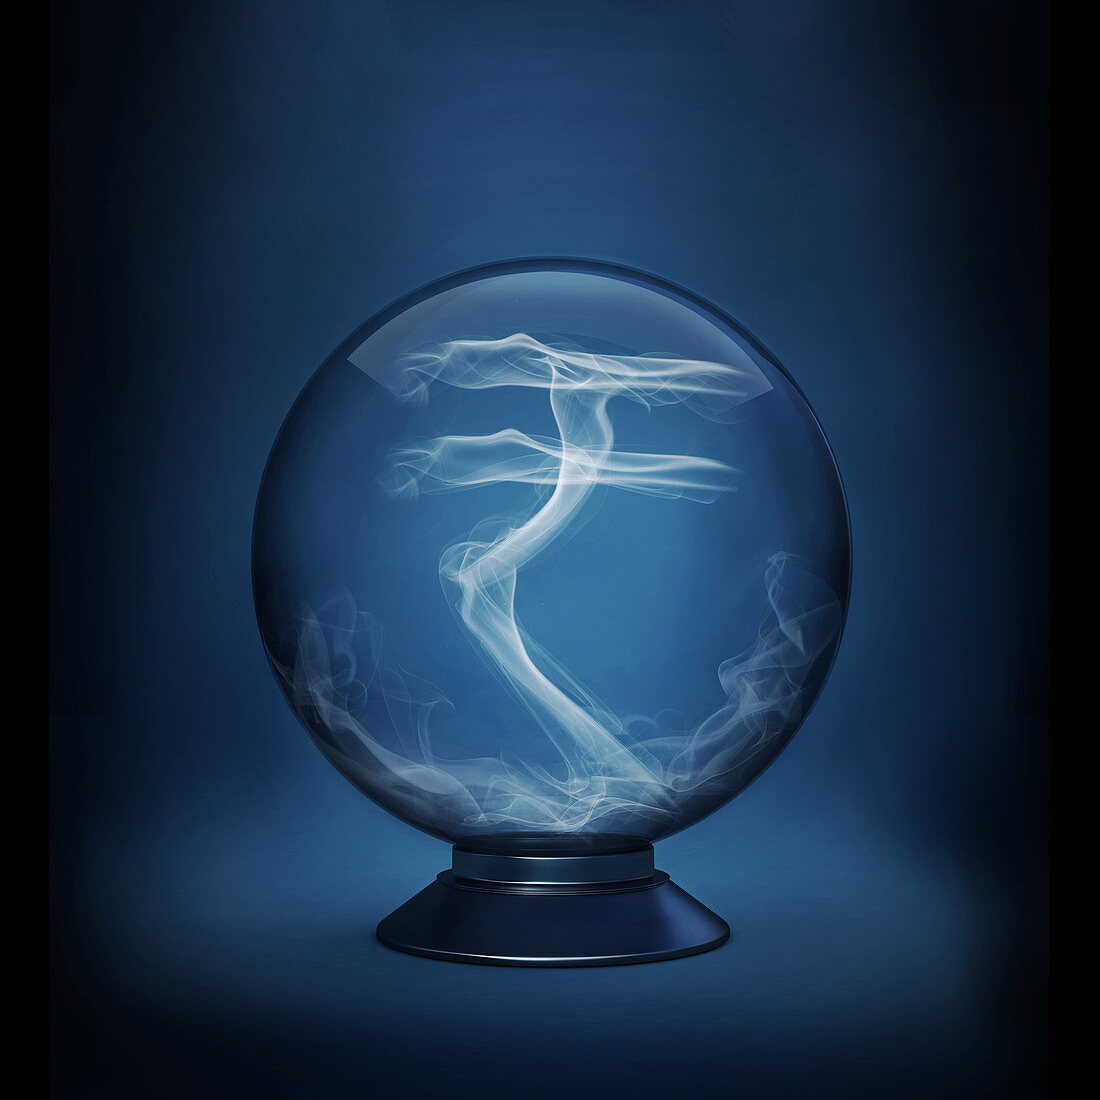 Illustration of rupee sign in crystal ball